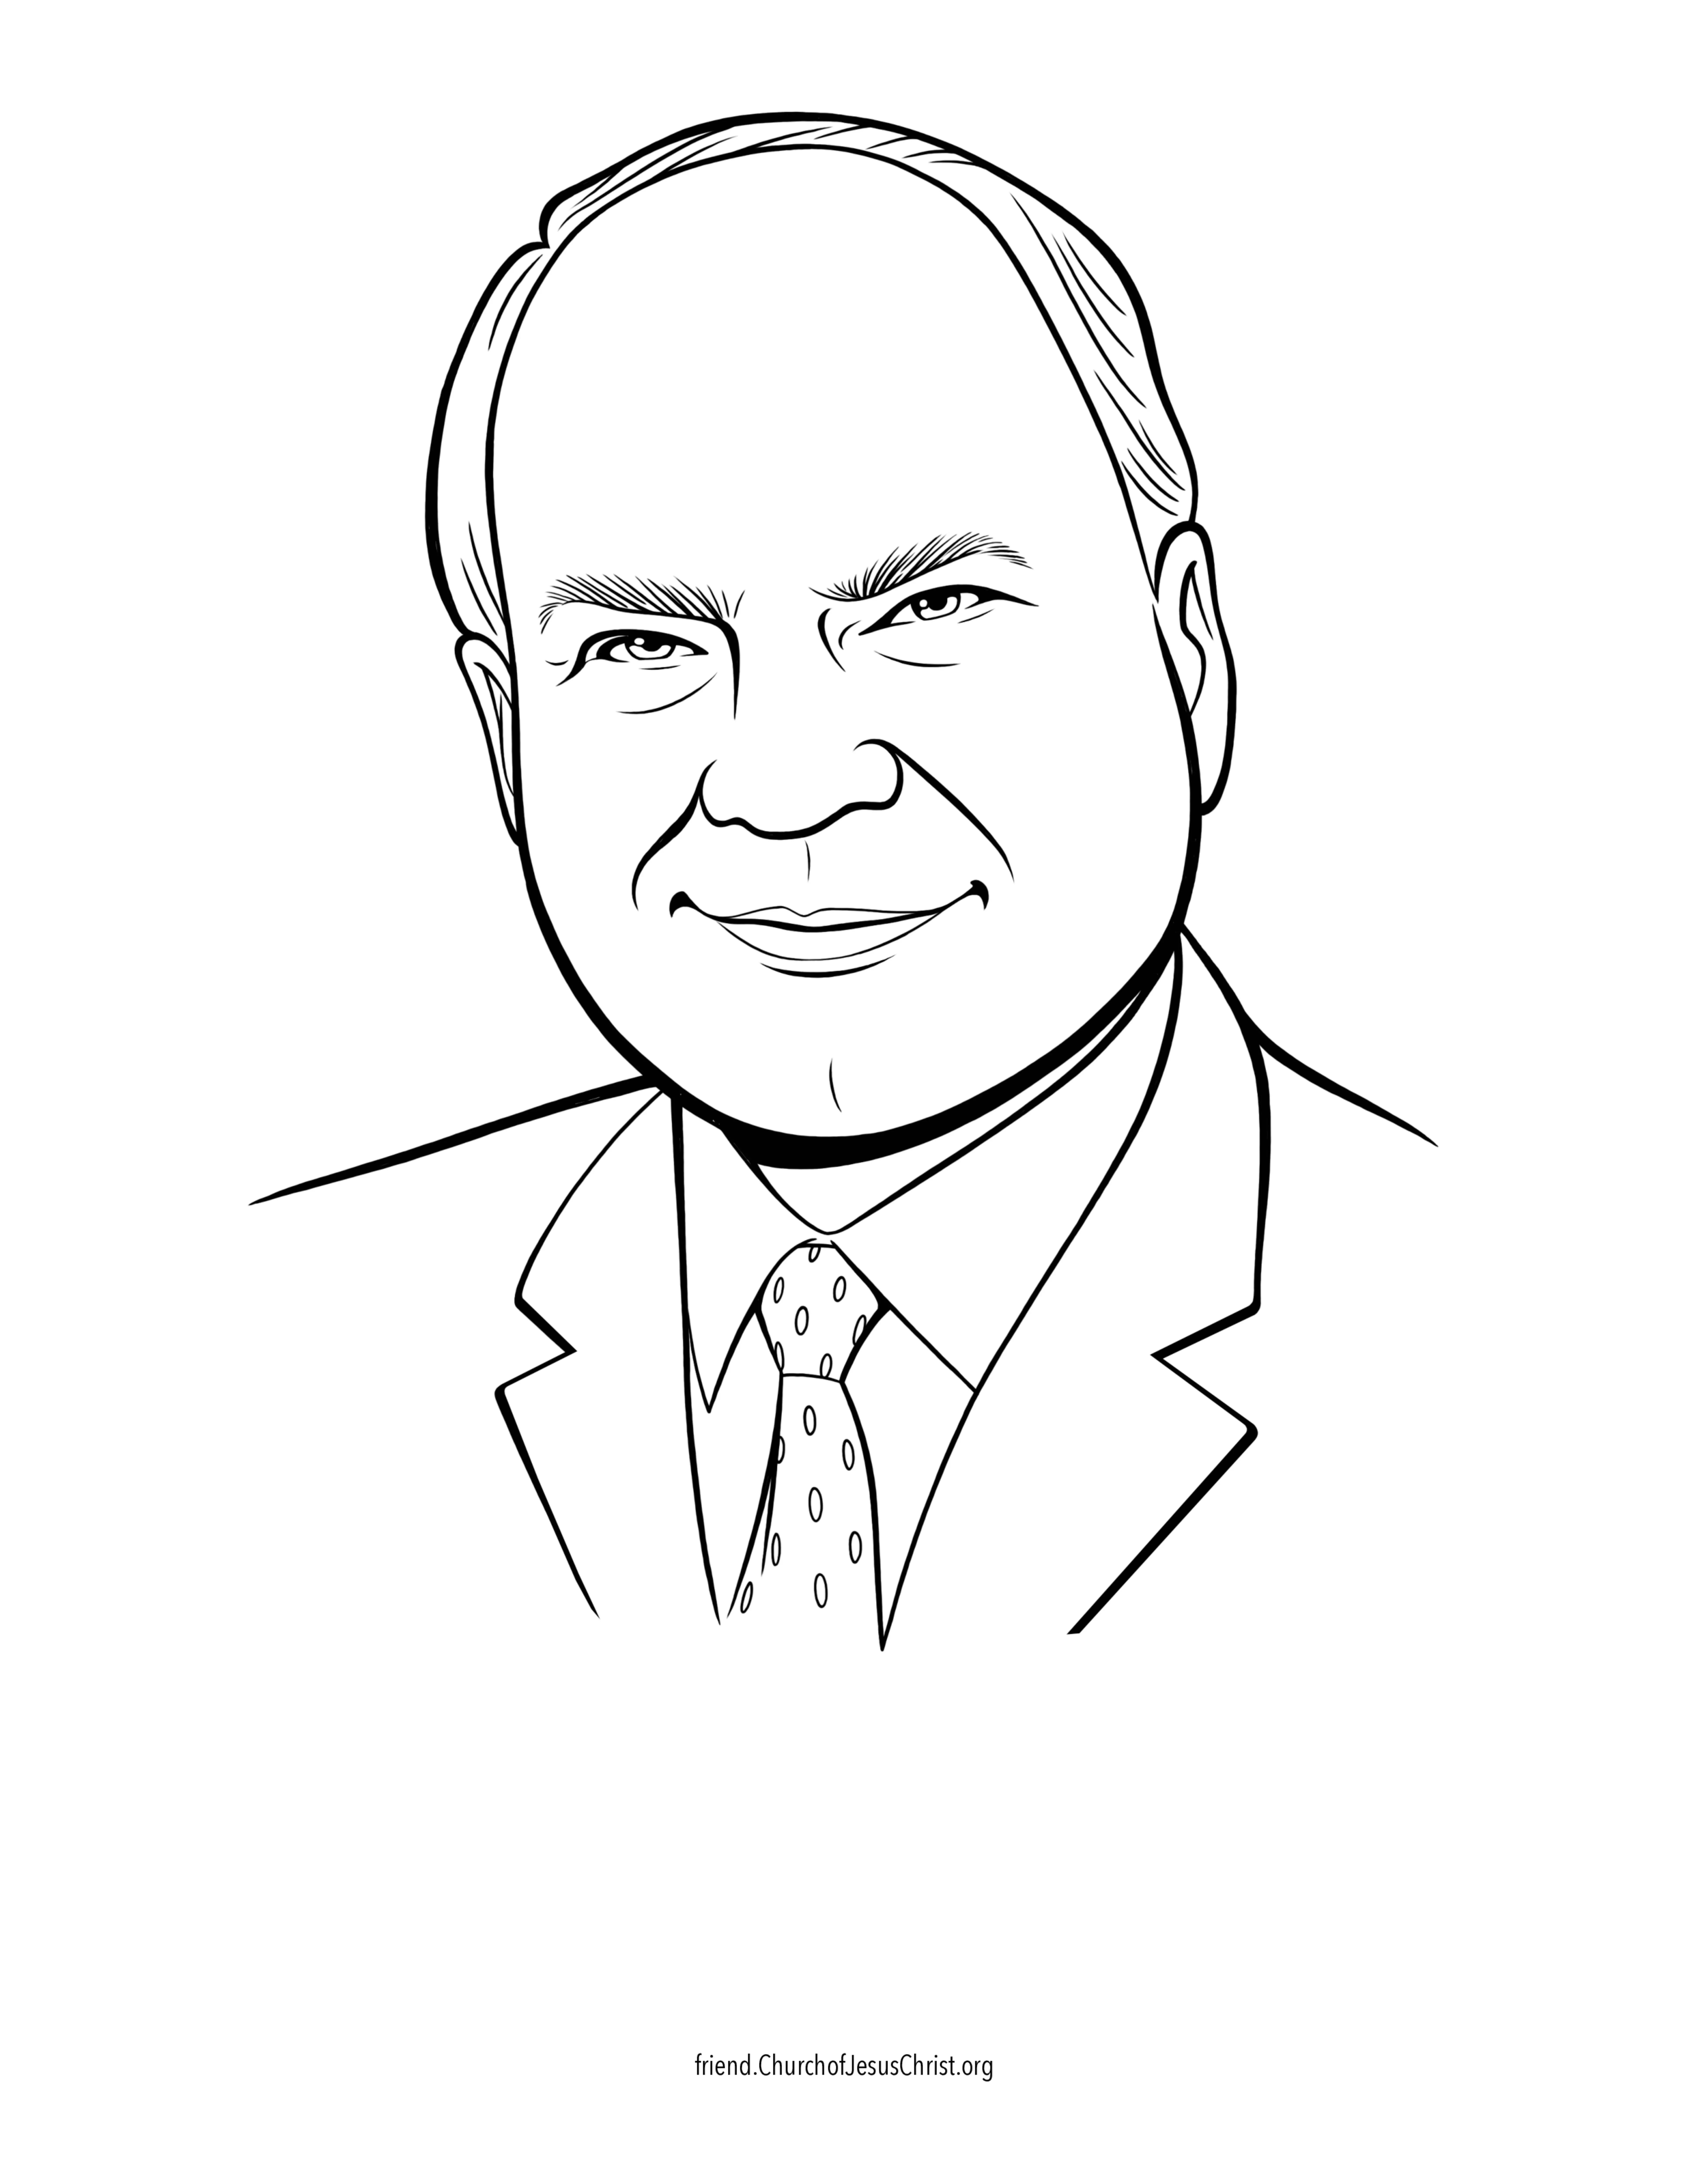 A coloring page of the official portrait of Ronald A. Rasband.